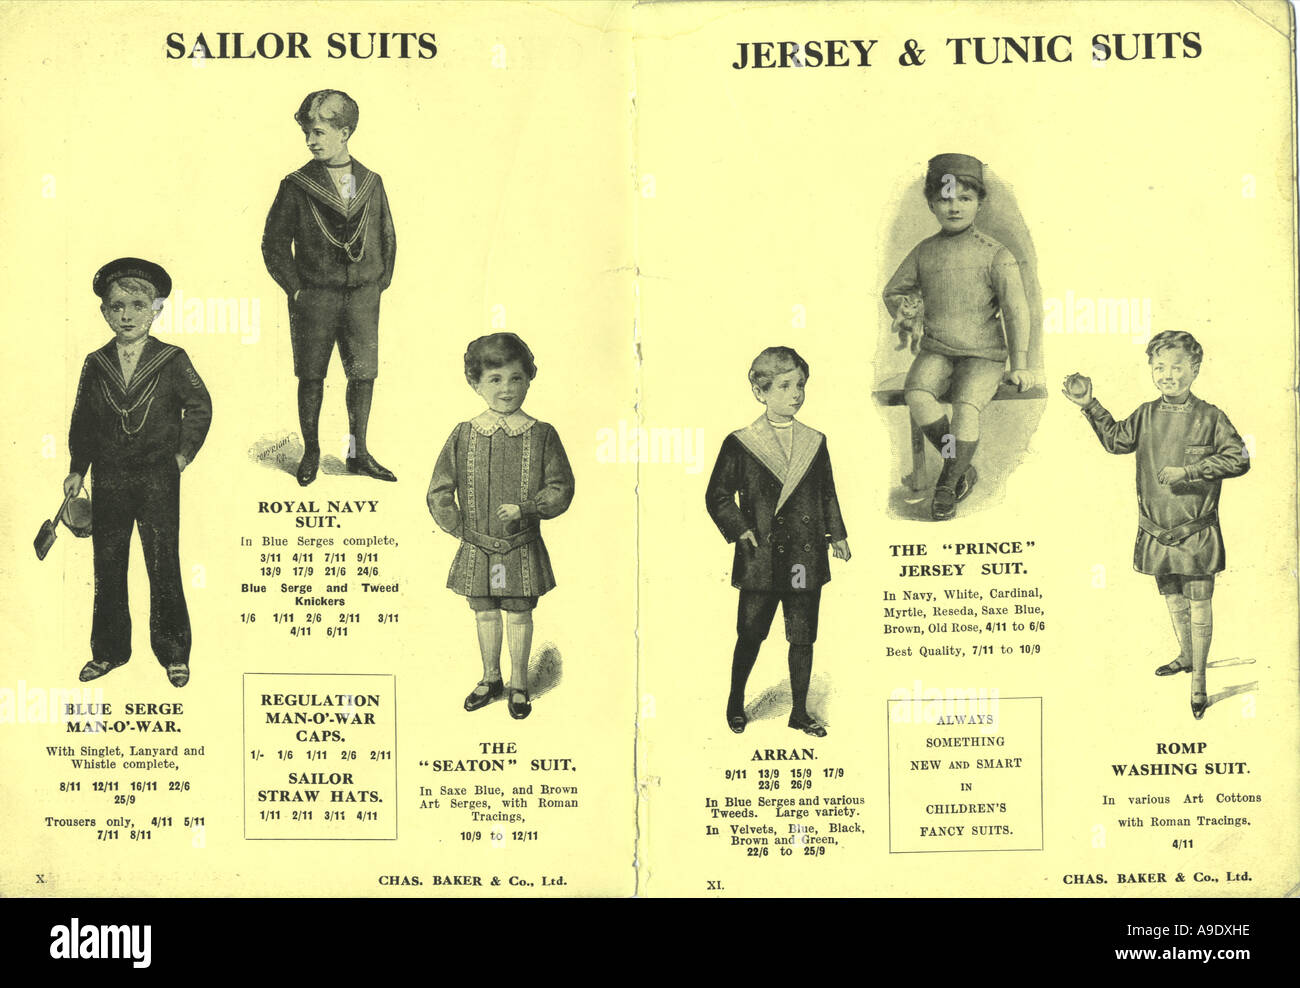 Boys' School Outfits catalogue  showing boys sailor suits and jersey and tunic suits circa 1898 Stock Photo